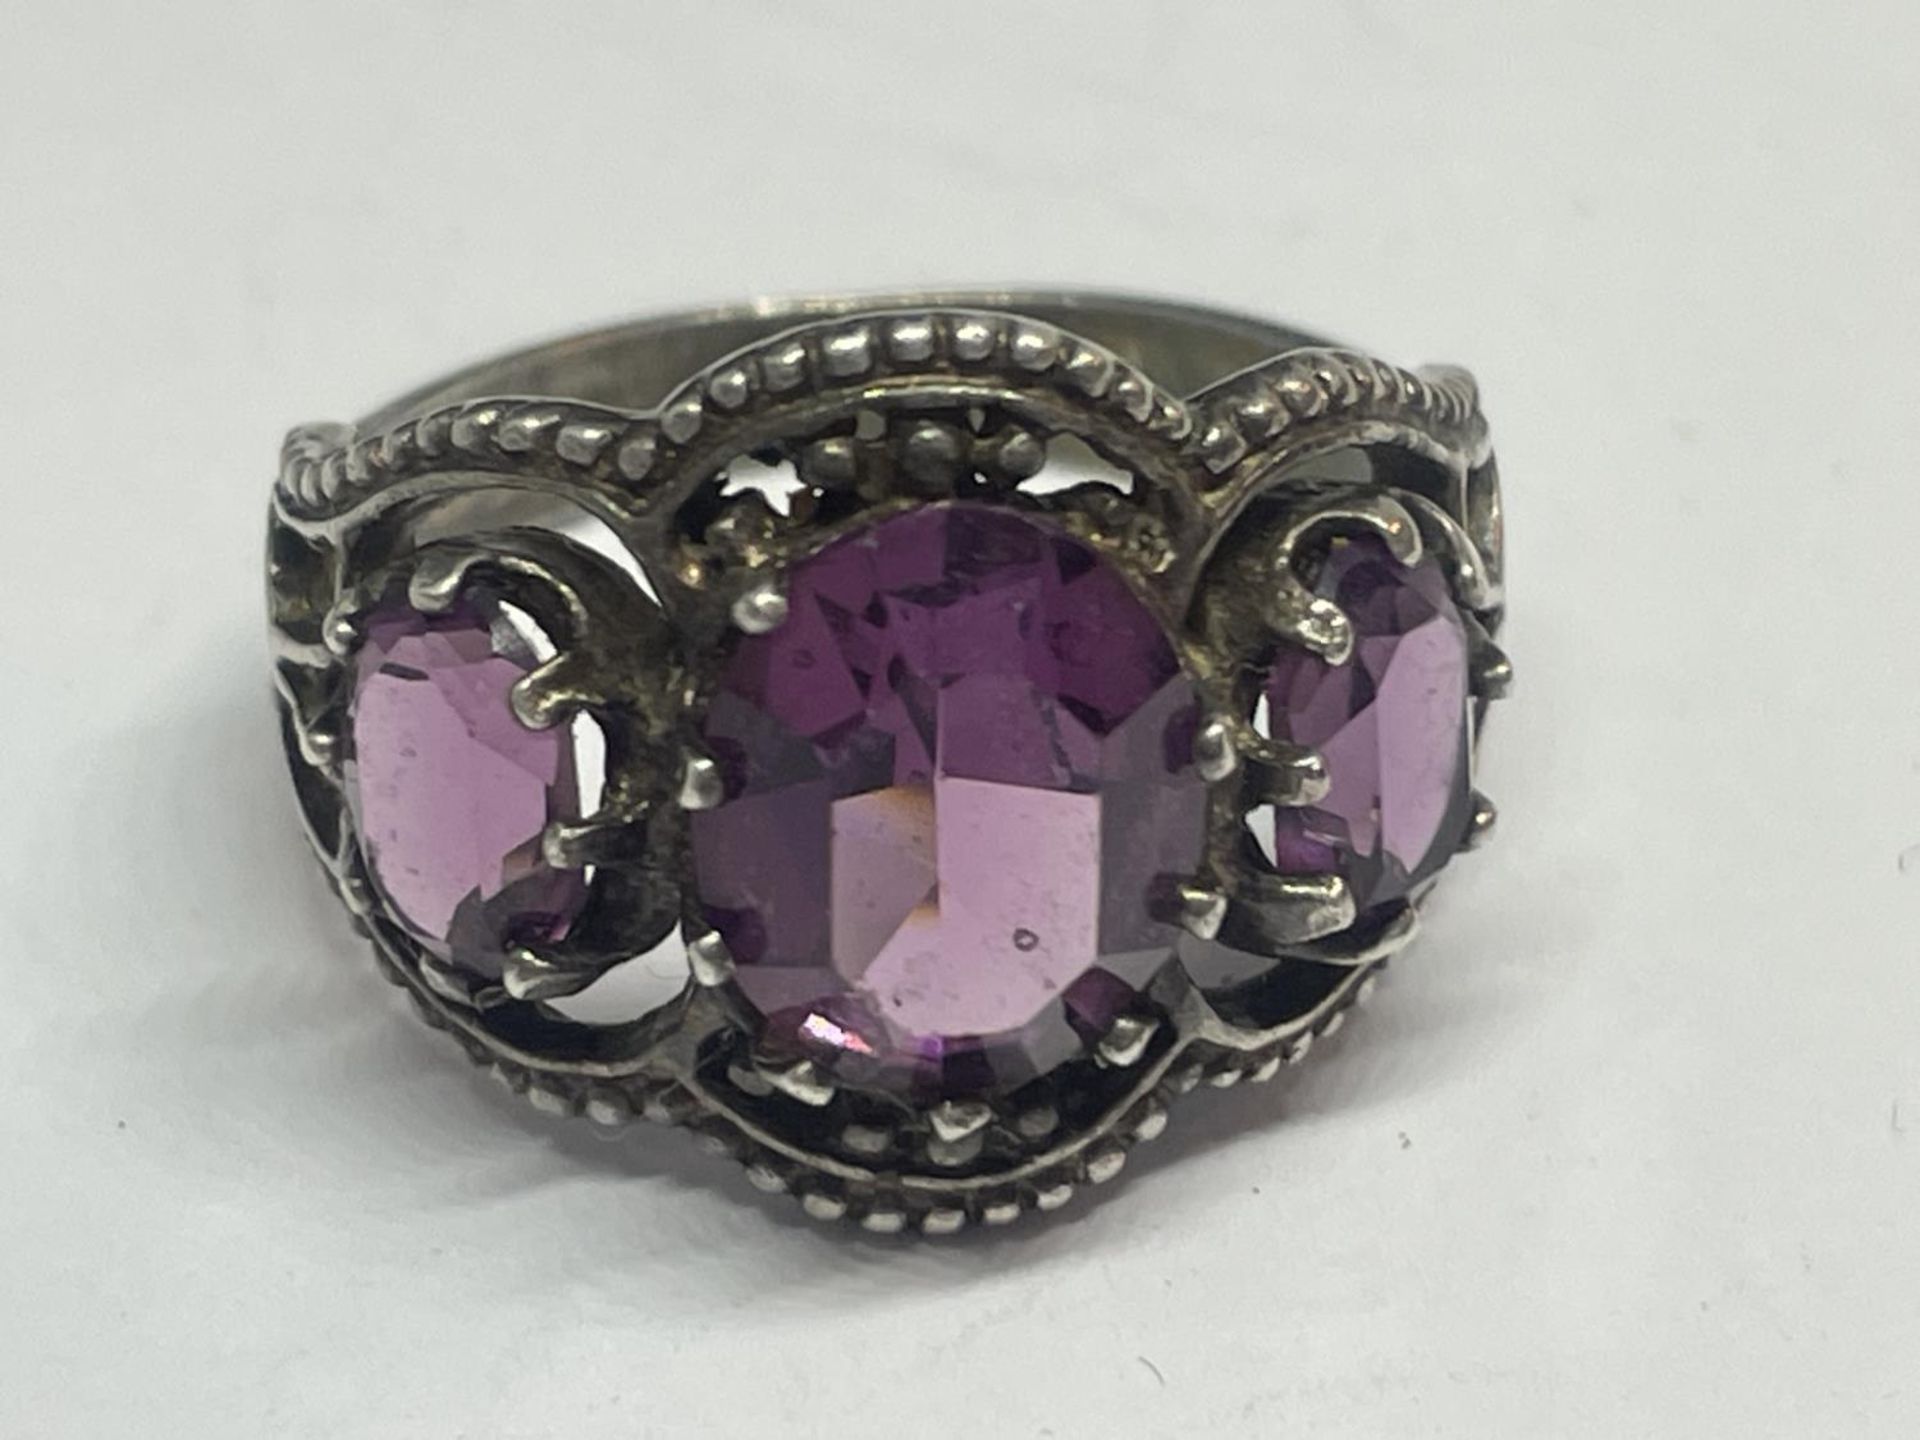 A SILVER RING WITH AMETHYST COLOURED STONES